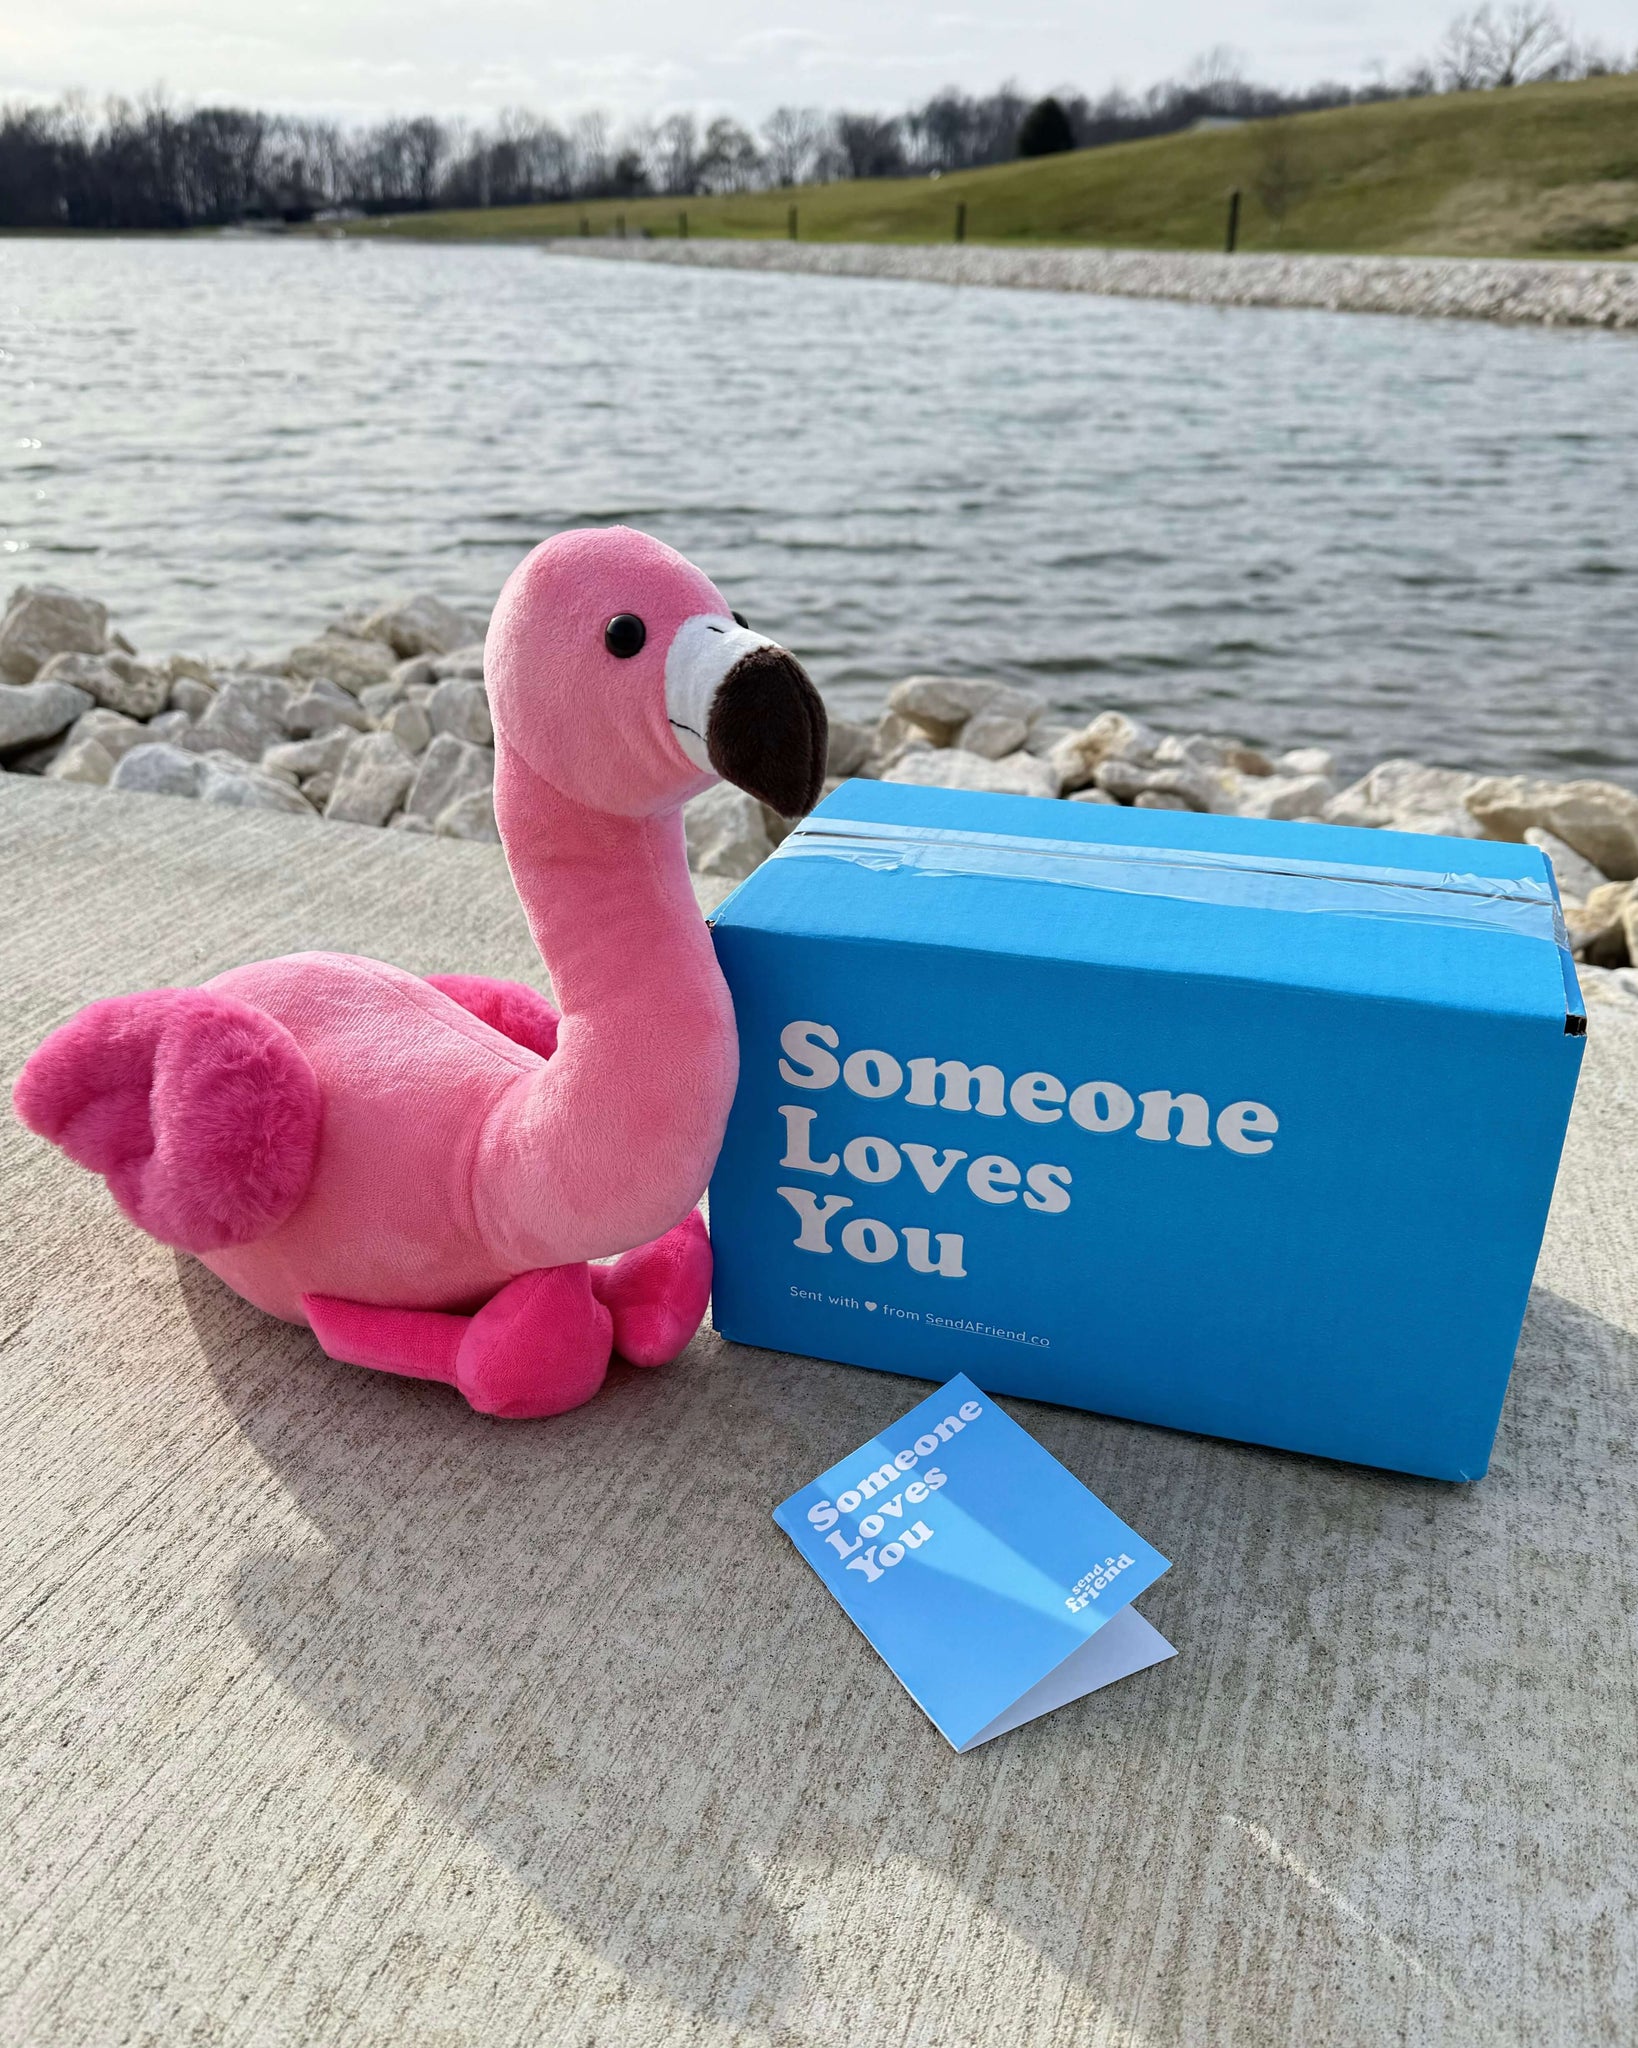 Photo of pink Faye the Flamingo sitting outdoors near body of water with Someone Loves You box and a note card